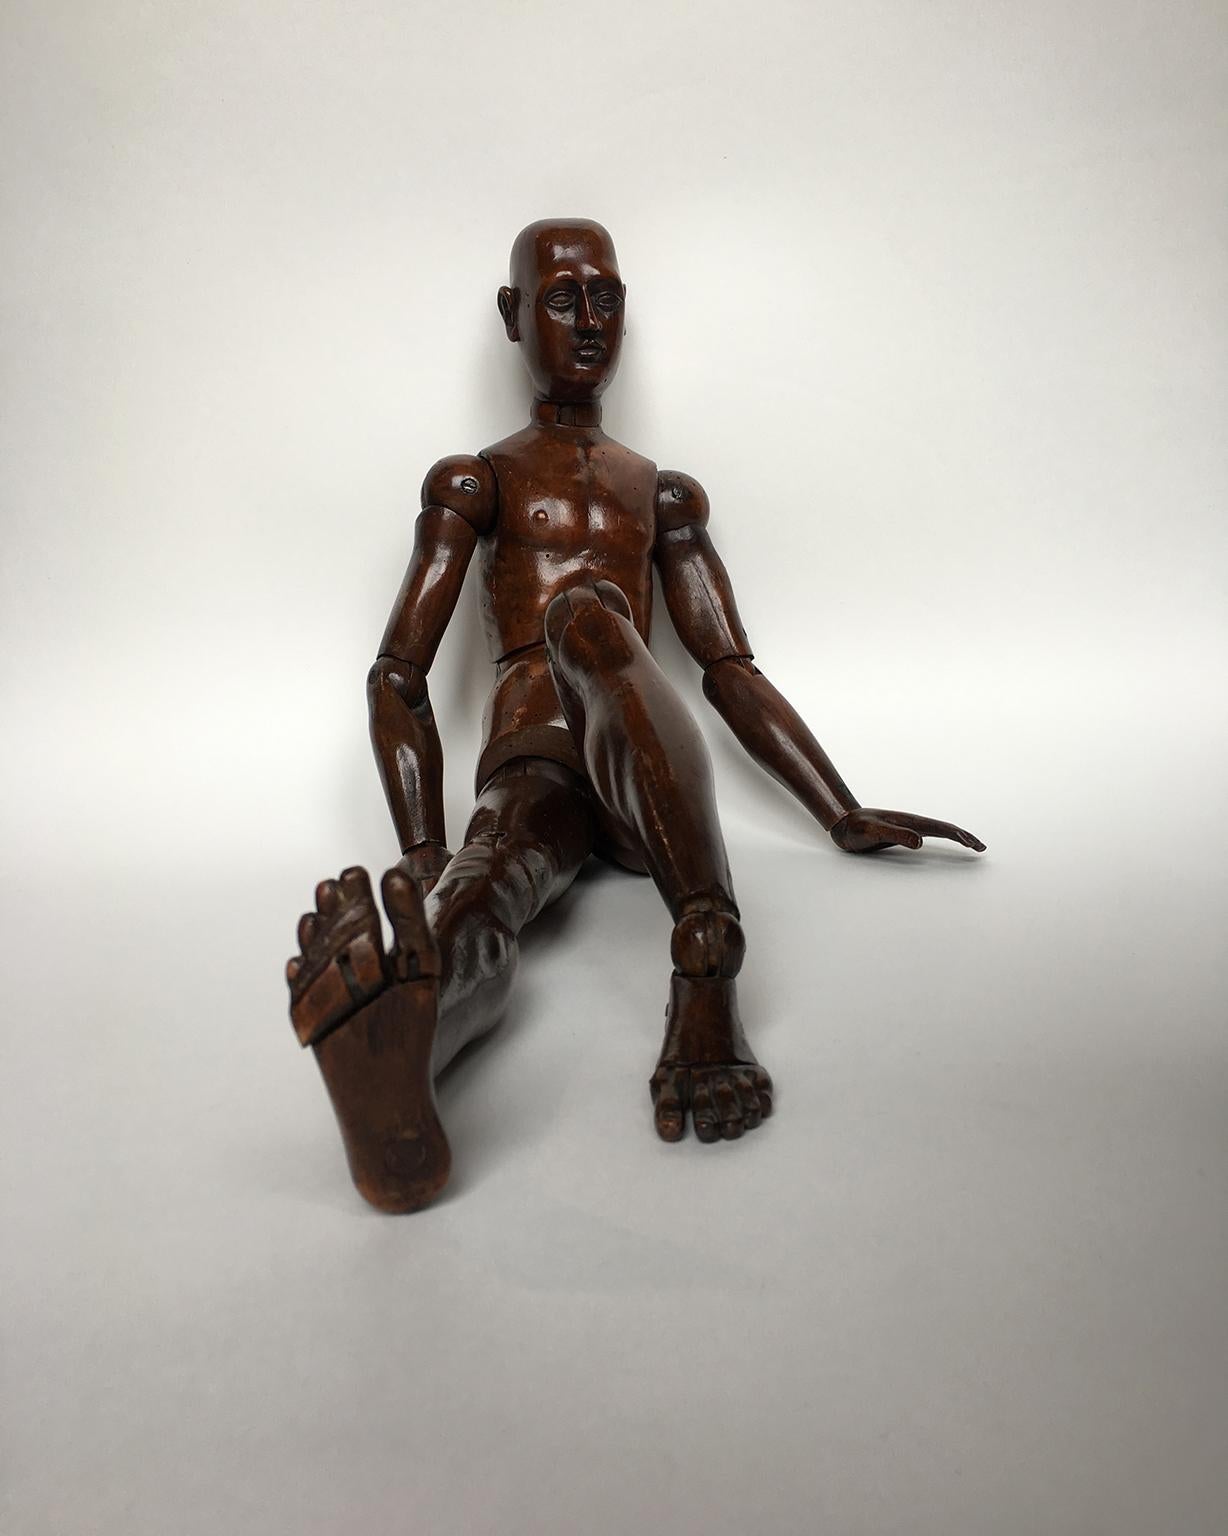 Workshop mannequin
wood, graven and carved
Italy or France, mid-19th century.

Measures: H 24.40 in x 6.69 in x 3.14 in
H 62 cm x 17 cm x 8 cm

State of conservation: excellent

The mannequin is sculpted in a very realistic manner, with the